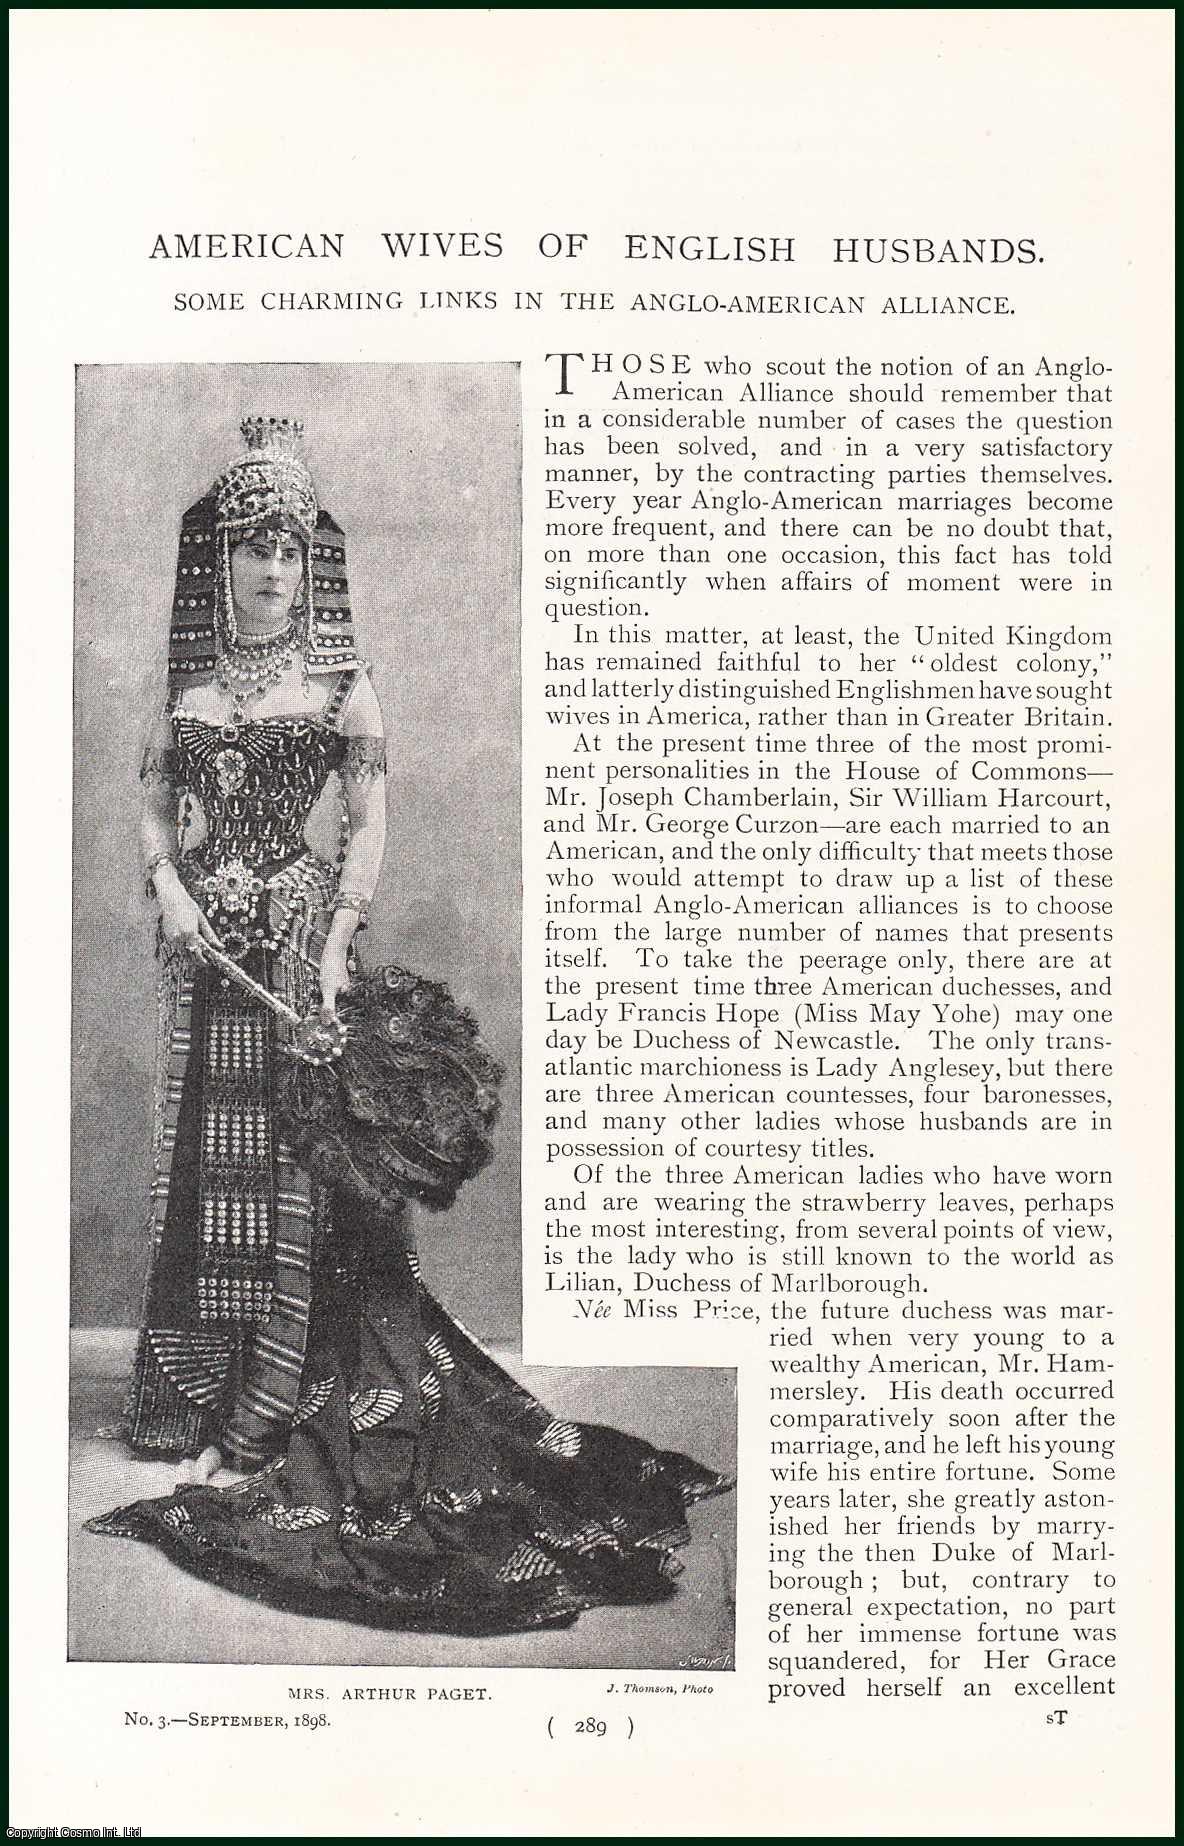 No Author Stated - Lady Terence Blackwood ; Lady Harcourt ; The Duchess of Marlborough ; Lady Arthur Butler & others : American Wives of English Husbands. Some Charming Links in the Anglo-American Alliance. An uncommon original article from the Harmsworth London Magazine, 1898.